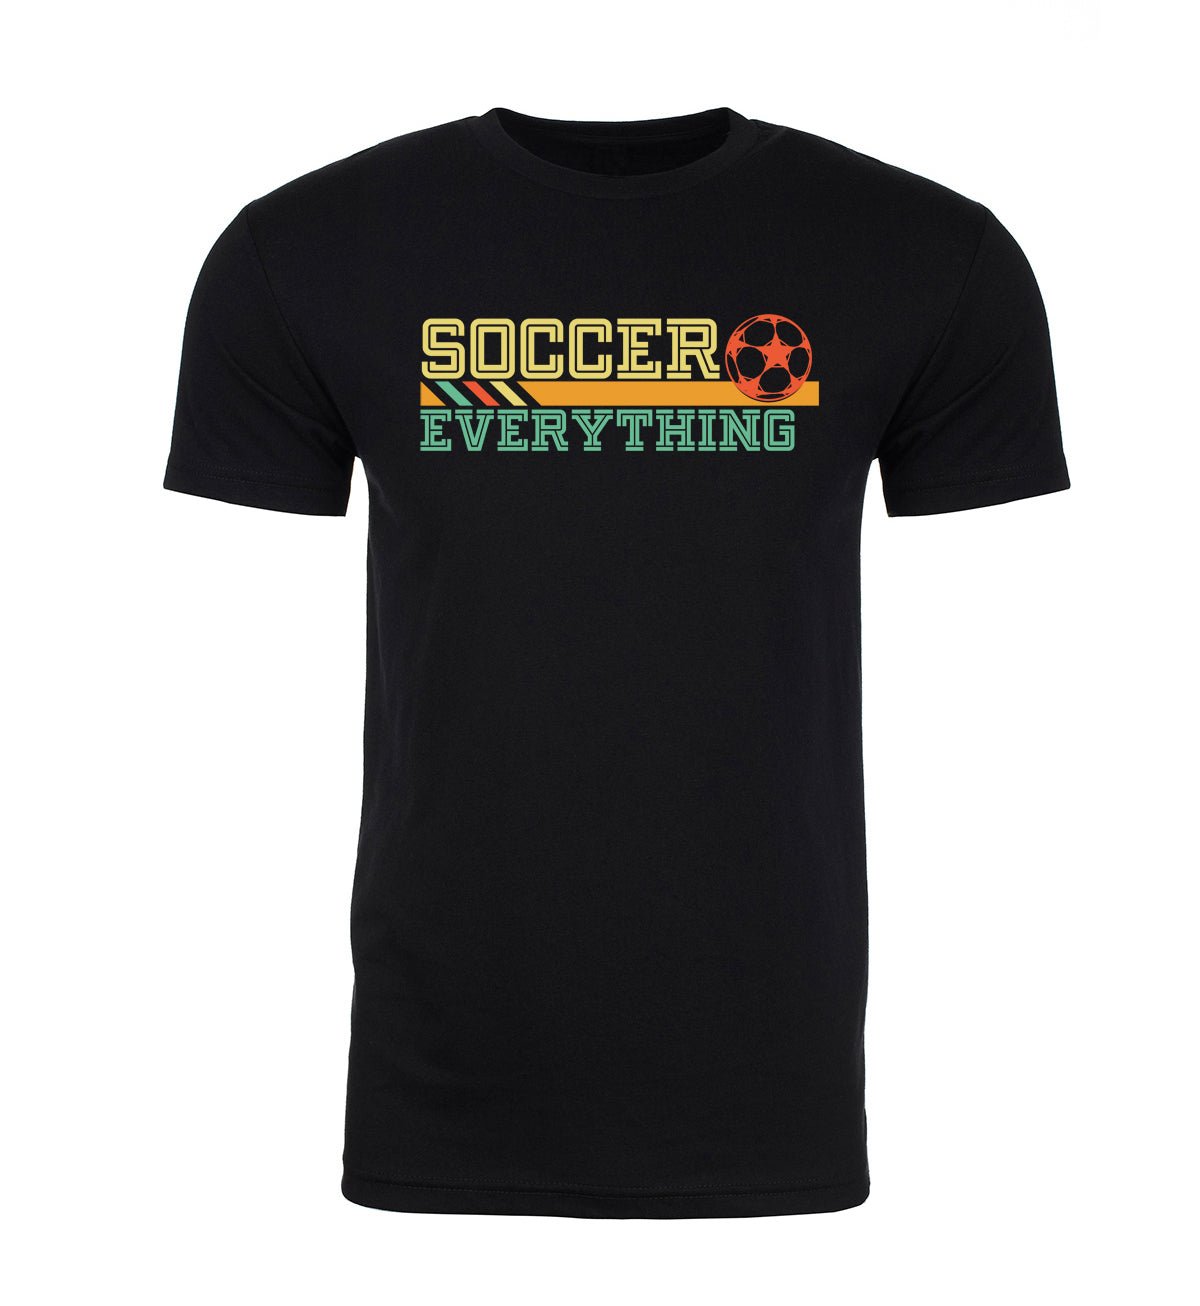 Soccer Over Everything Unisex T Shirts - Mato & Hash